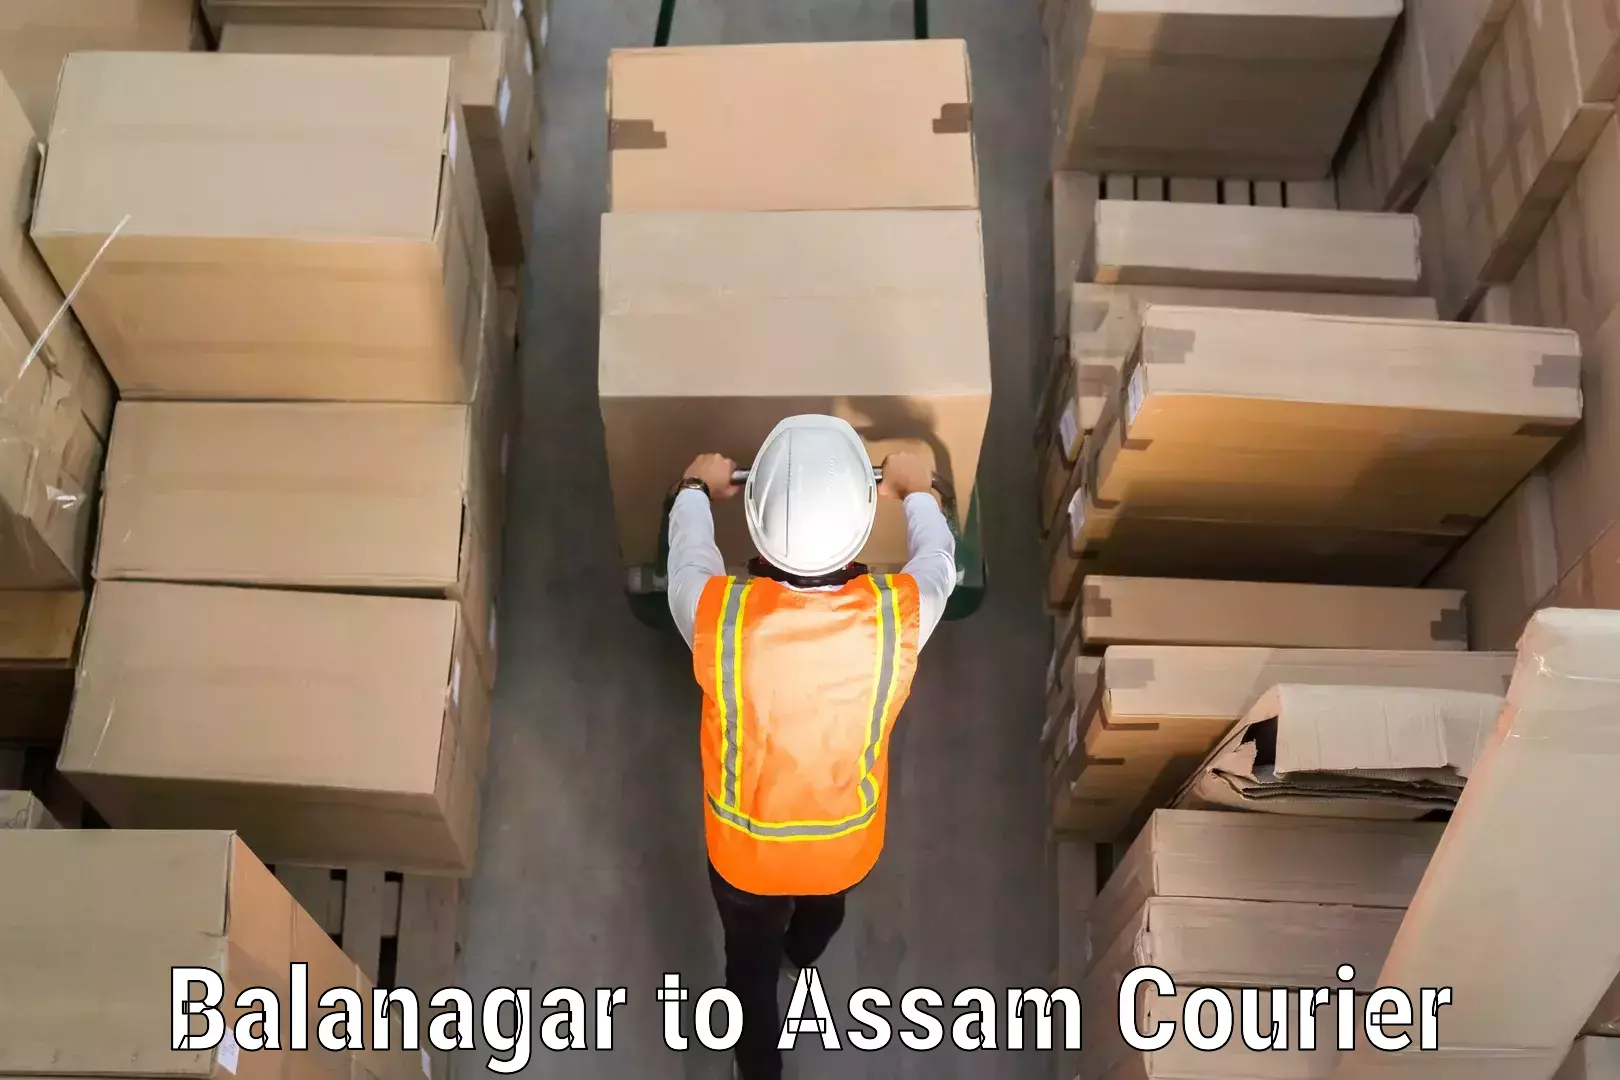 Luggage delivery news Balanagar to Lala Assam